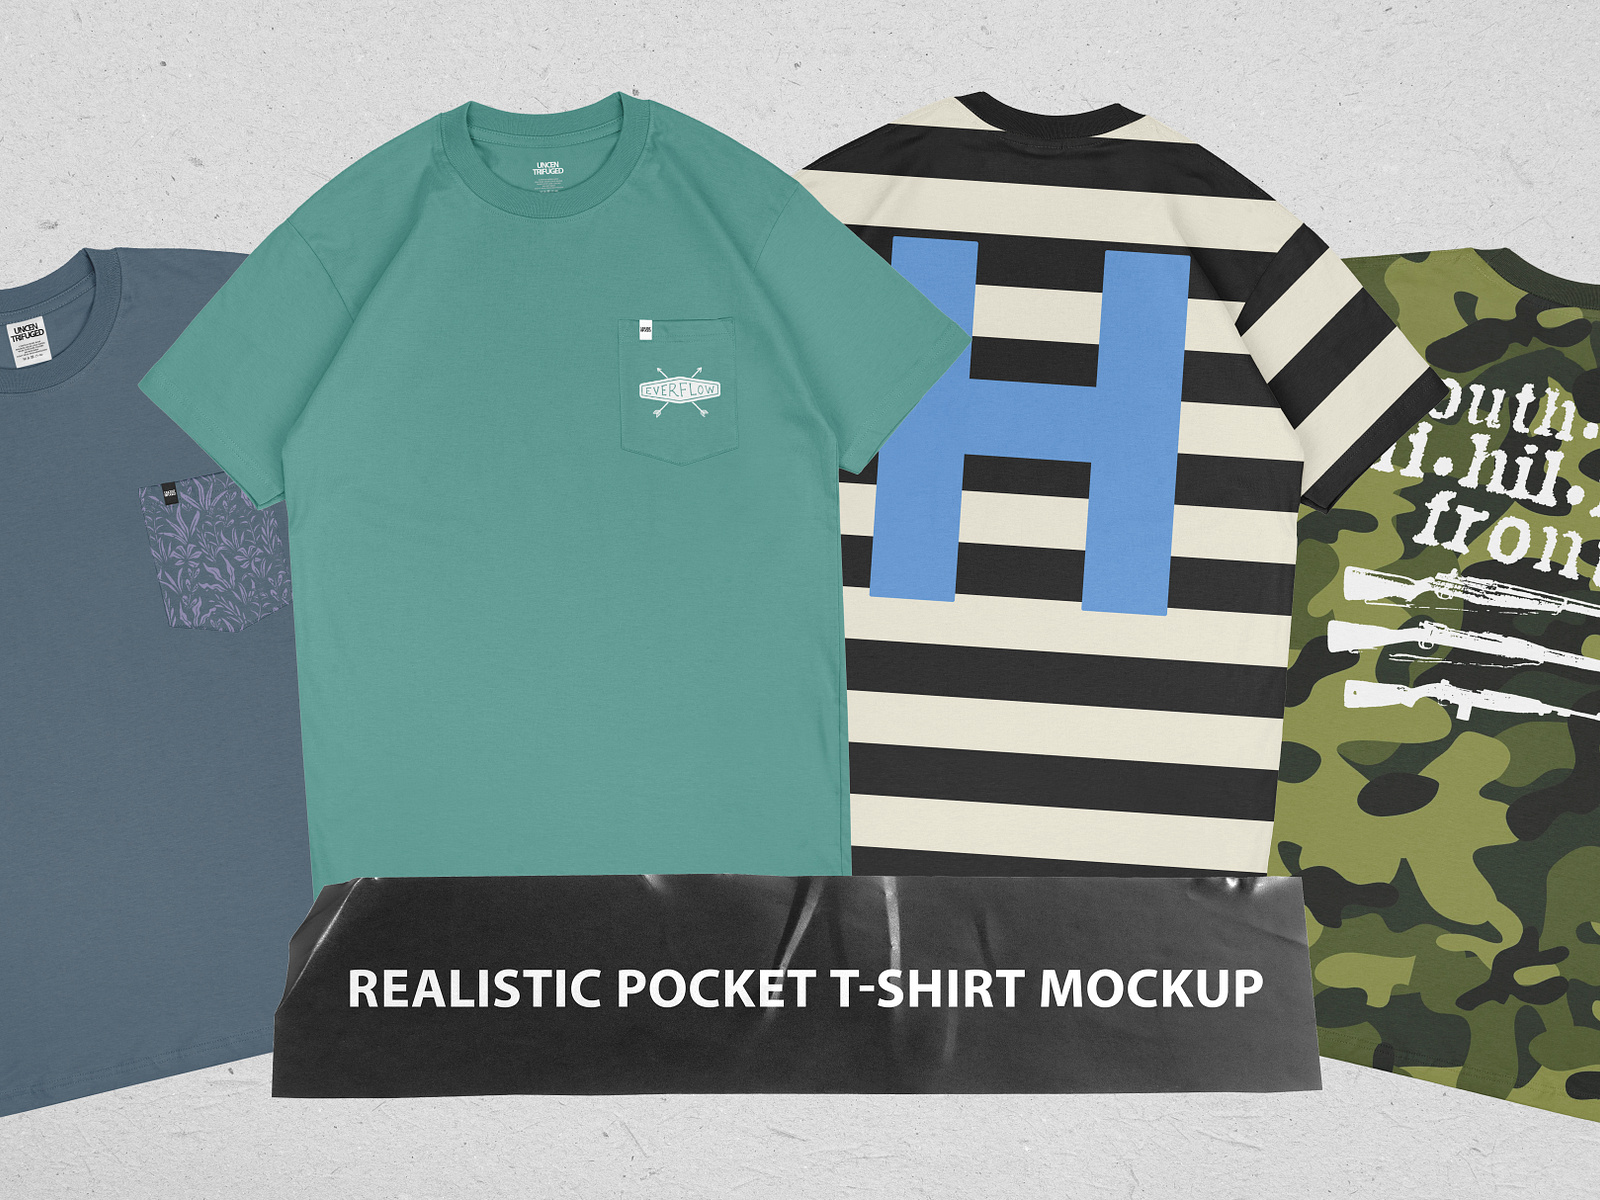 Realistic Pocket T-shirt Mockup by Uncentrifuged Pressure on Dribbble